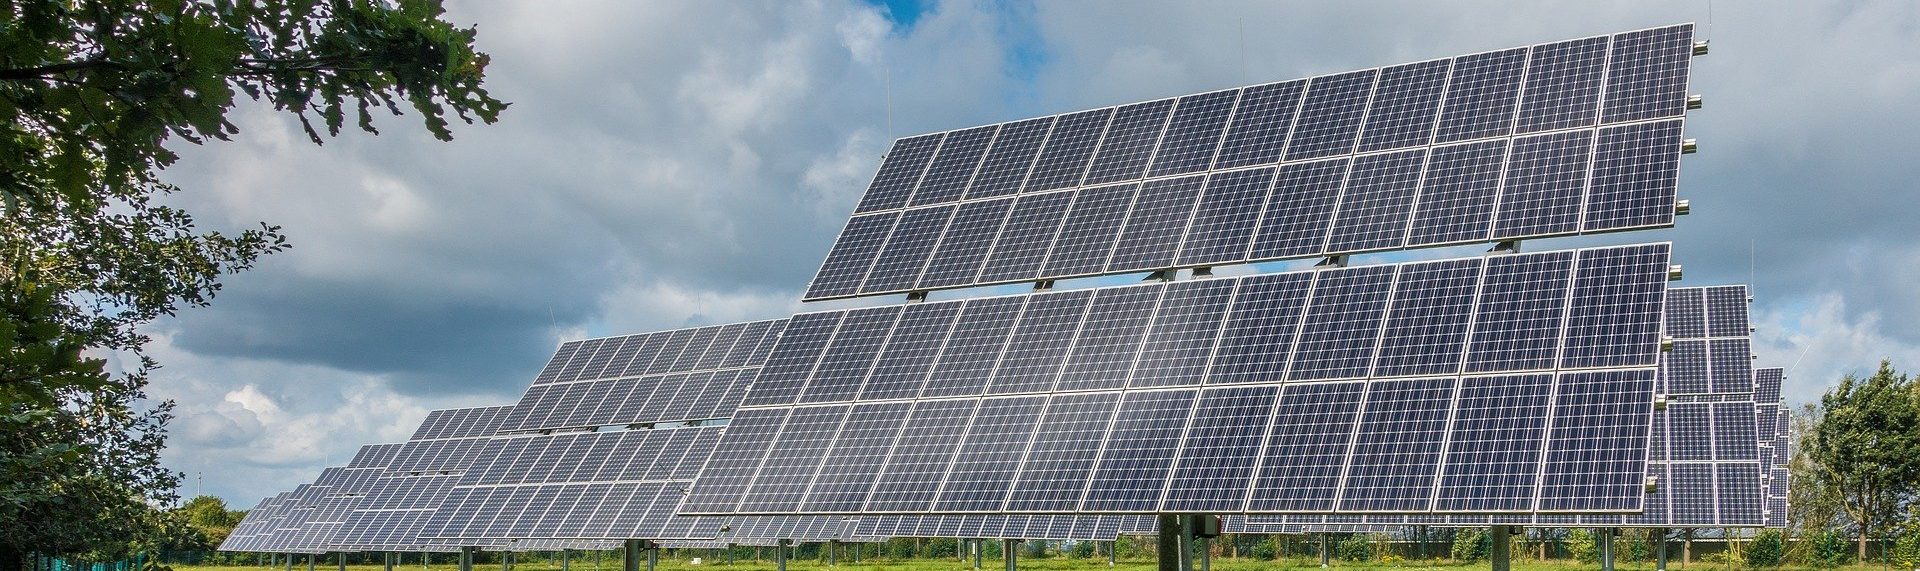 Making the Most of Solar Energy Technology